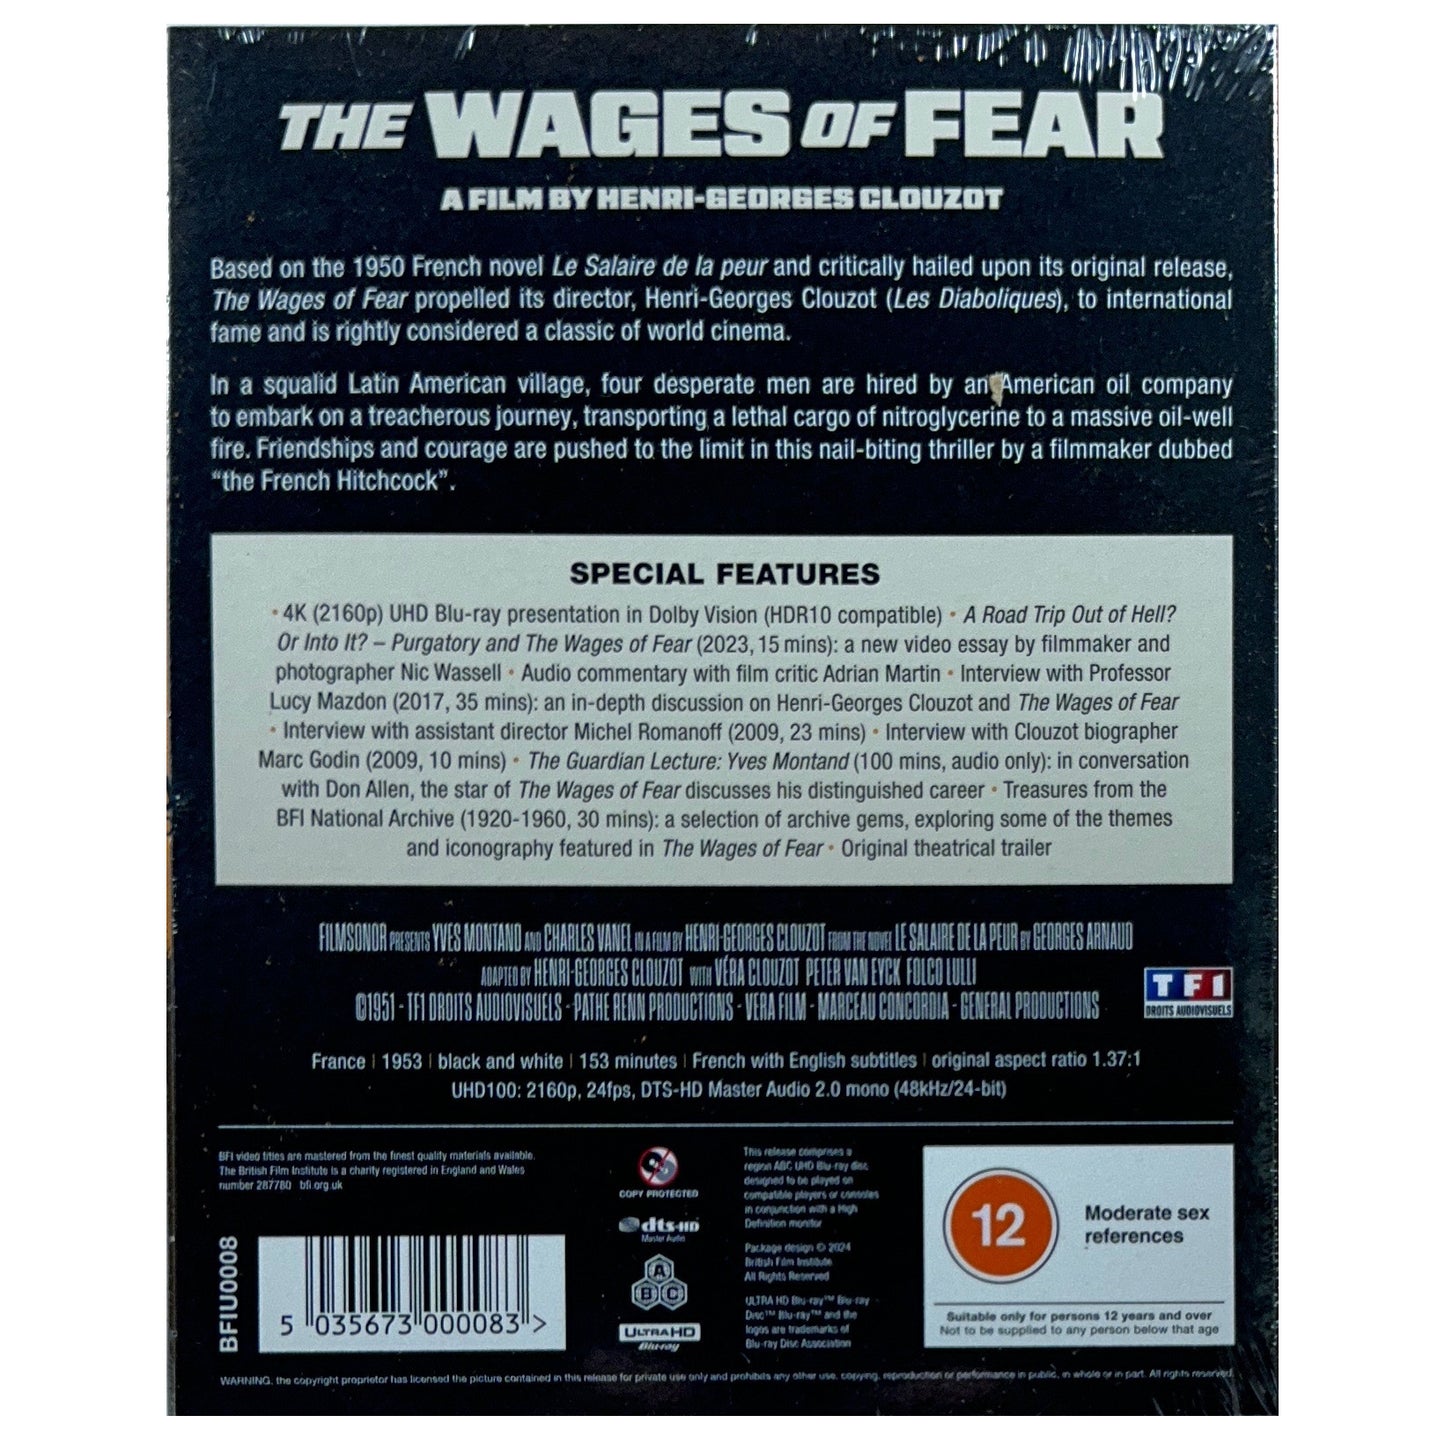 The Wages of Fear 4K Ultra-HD Blu-Ray